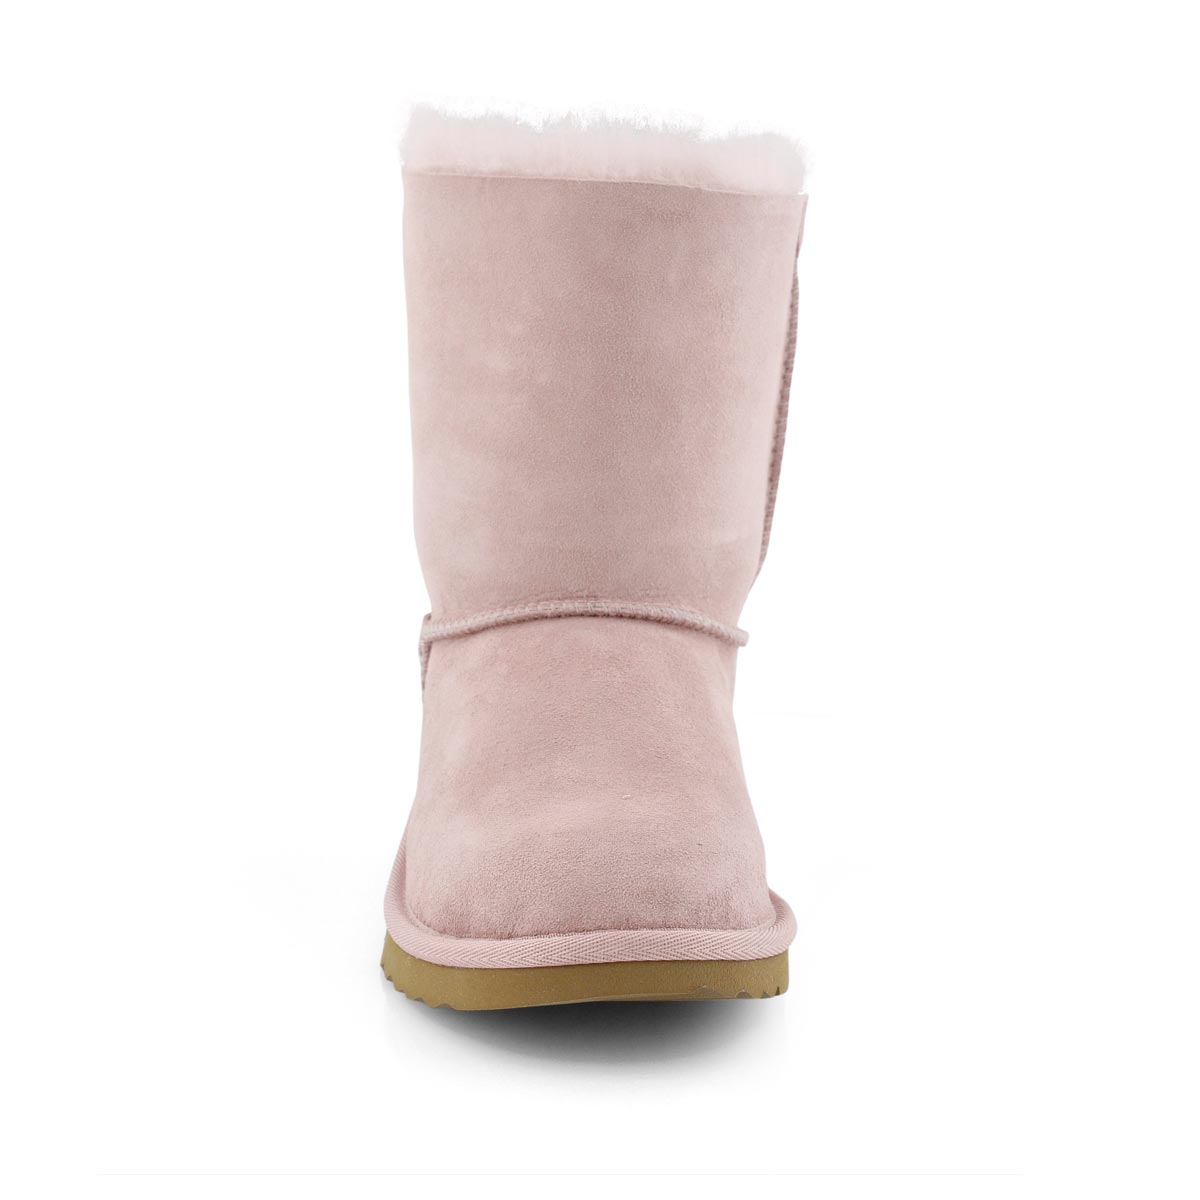 Bottes BAILEY BOW II cristal rose, filles